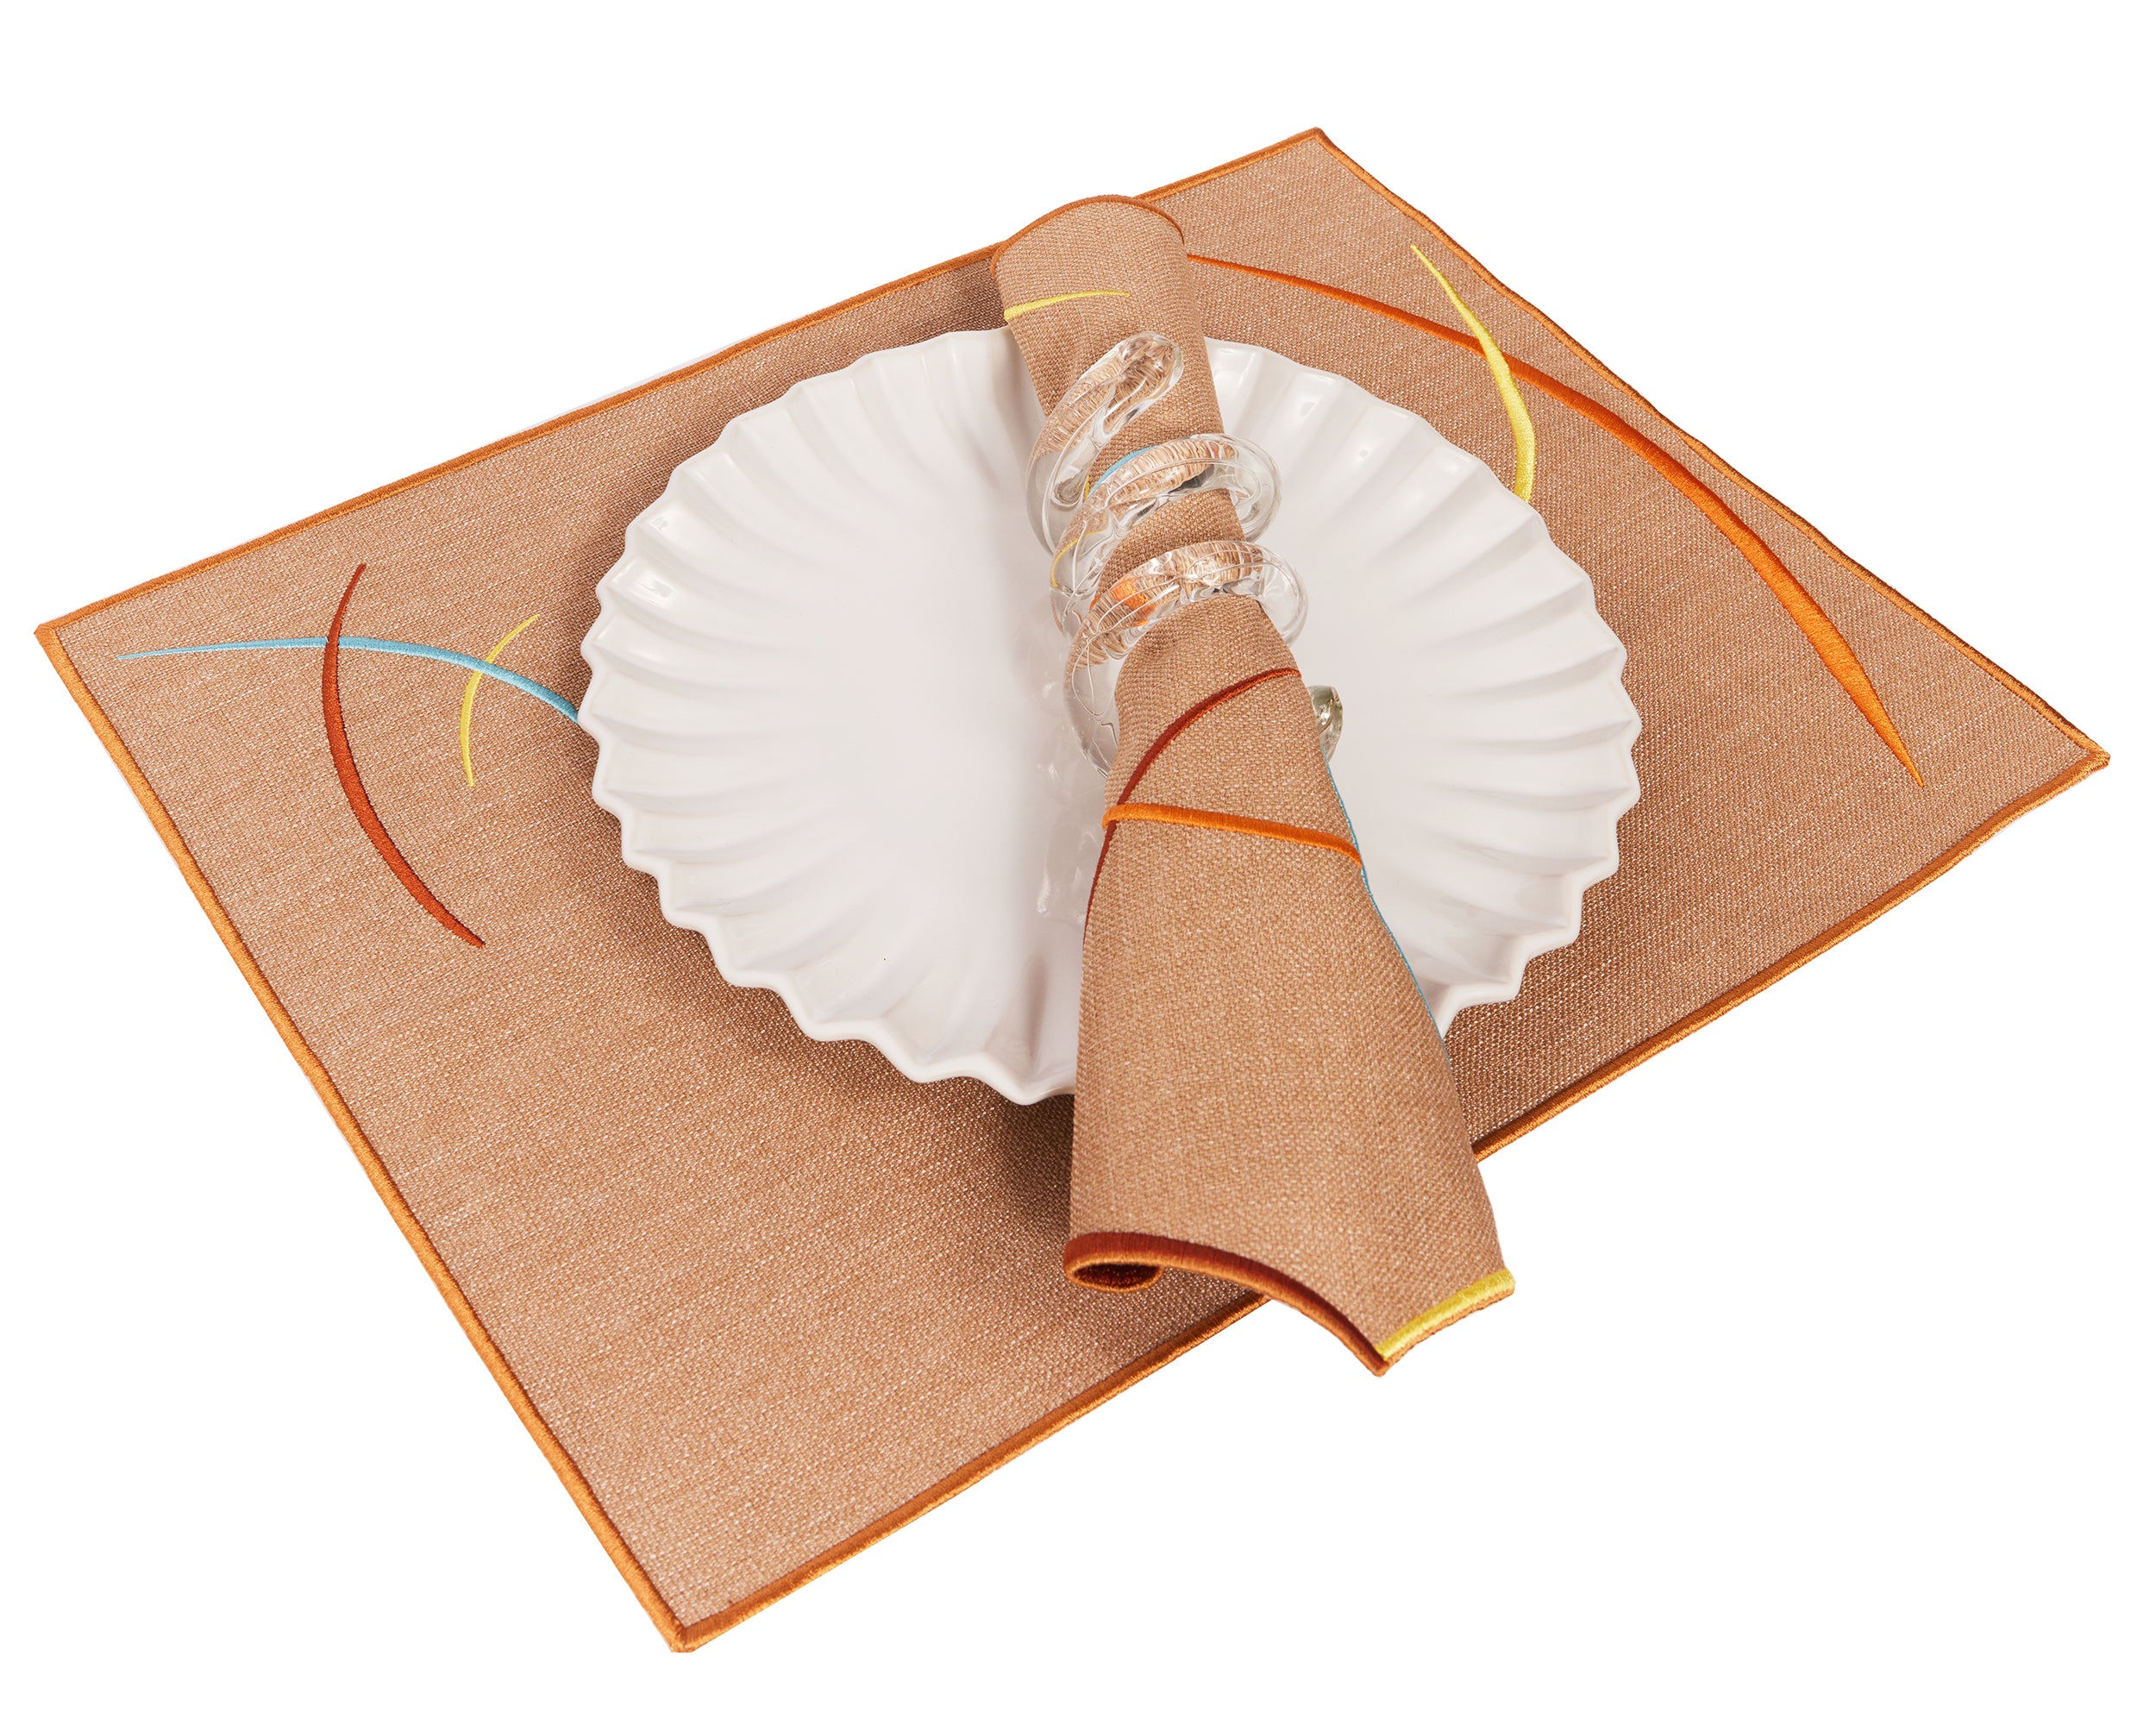 Placemat - Set of 2